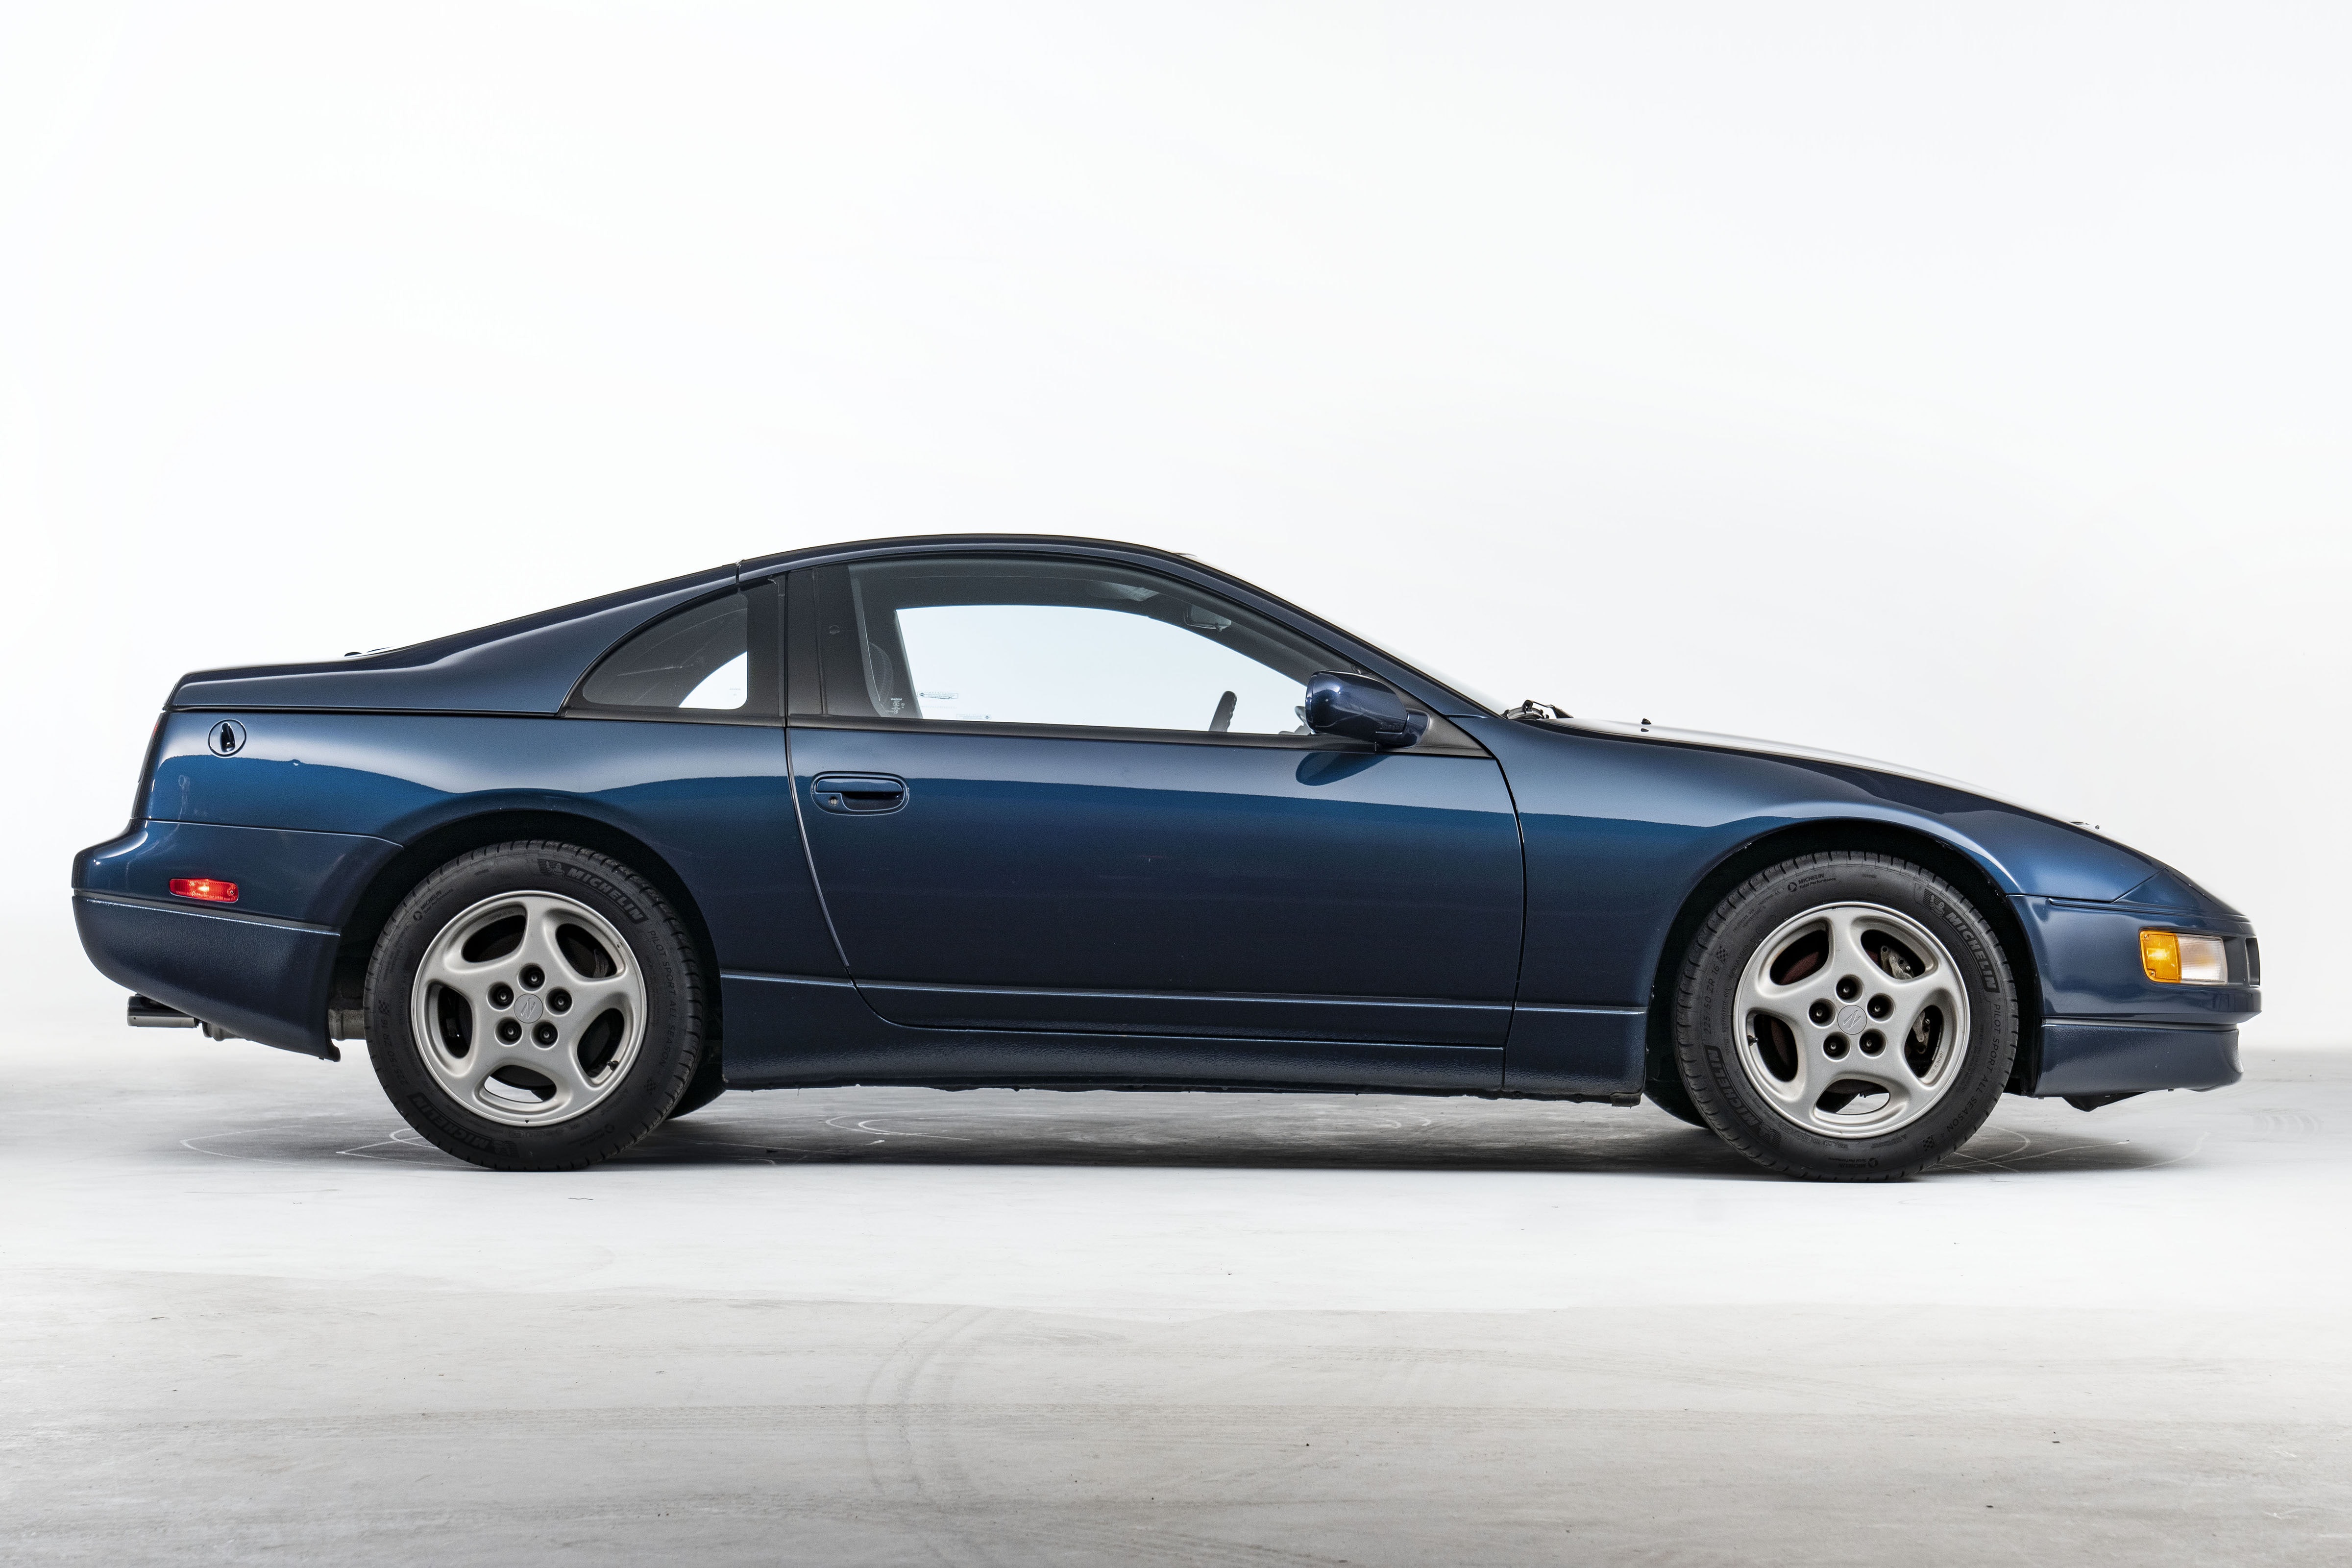 Nissan 300 ZX exterior - Side Profile